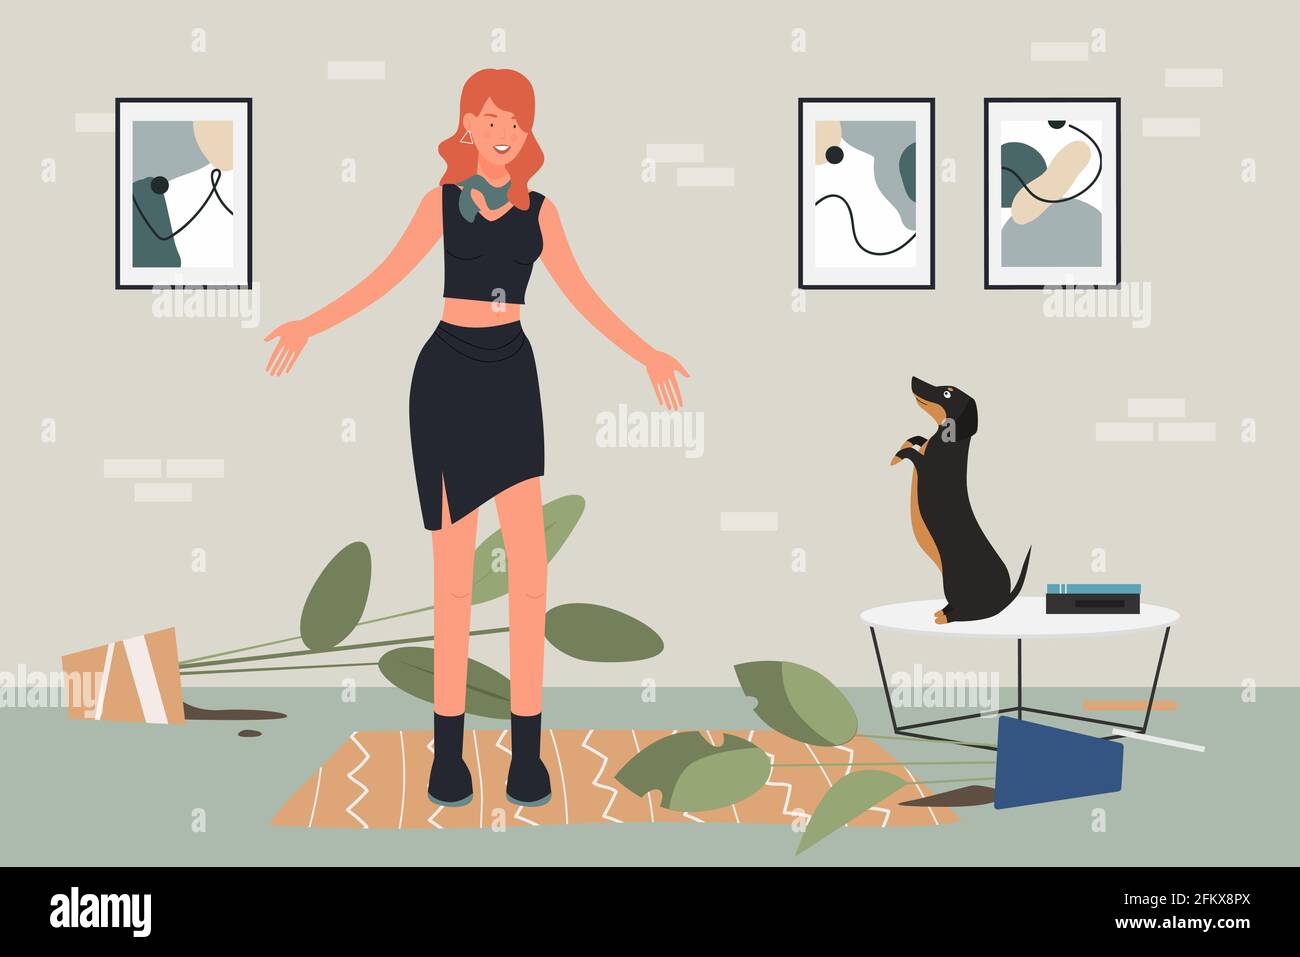 Pet dog education, overwhelmed pet owner young woman upset by dachshund dog behavior Stock Vector